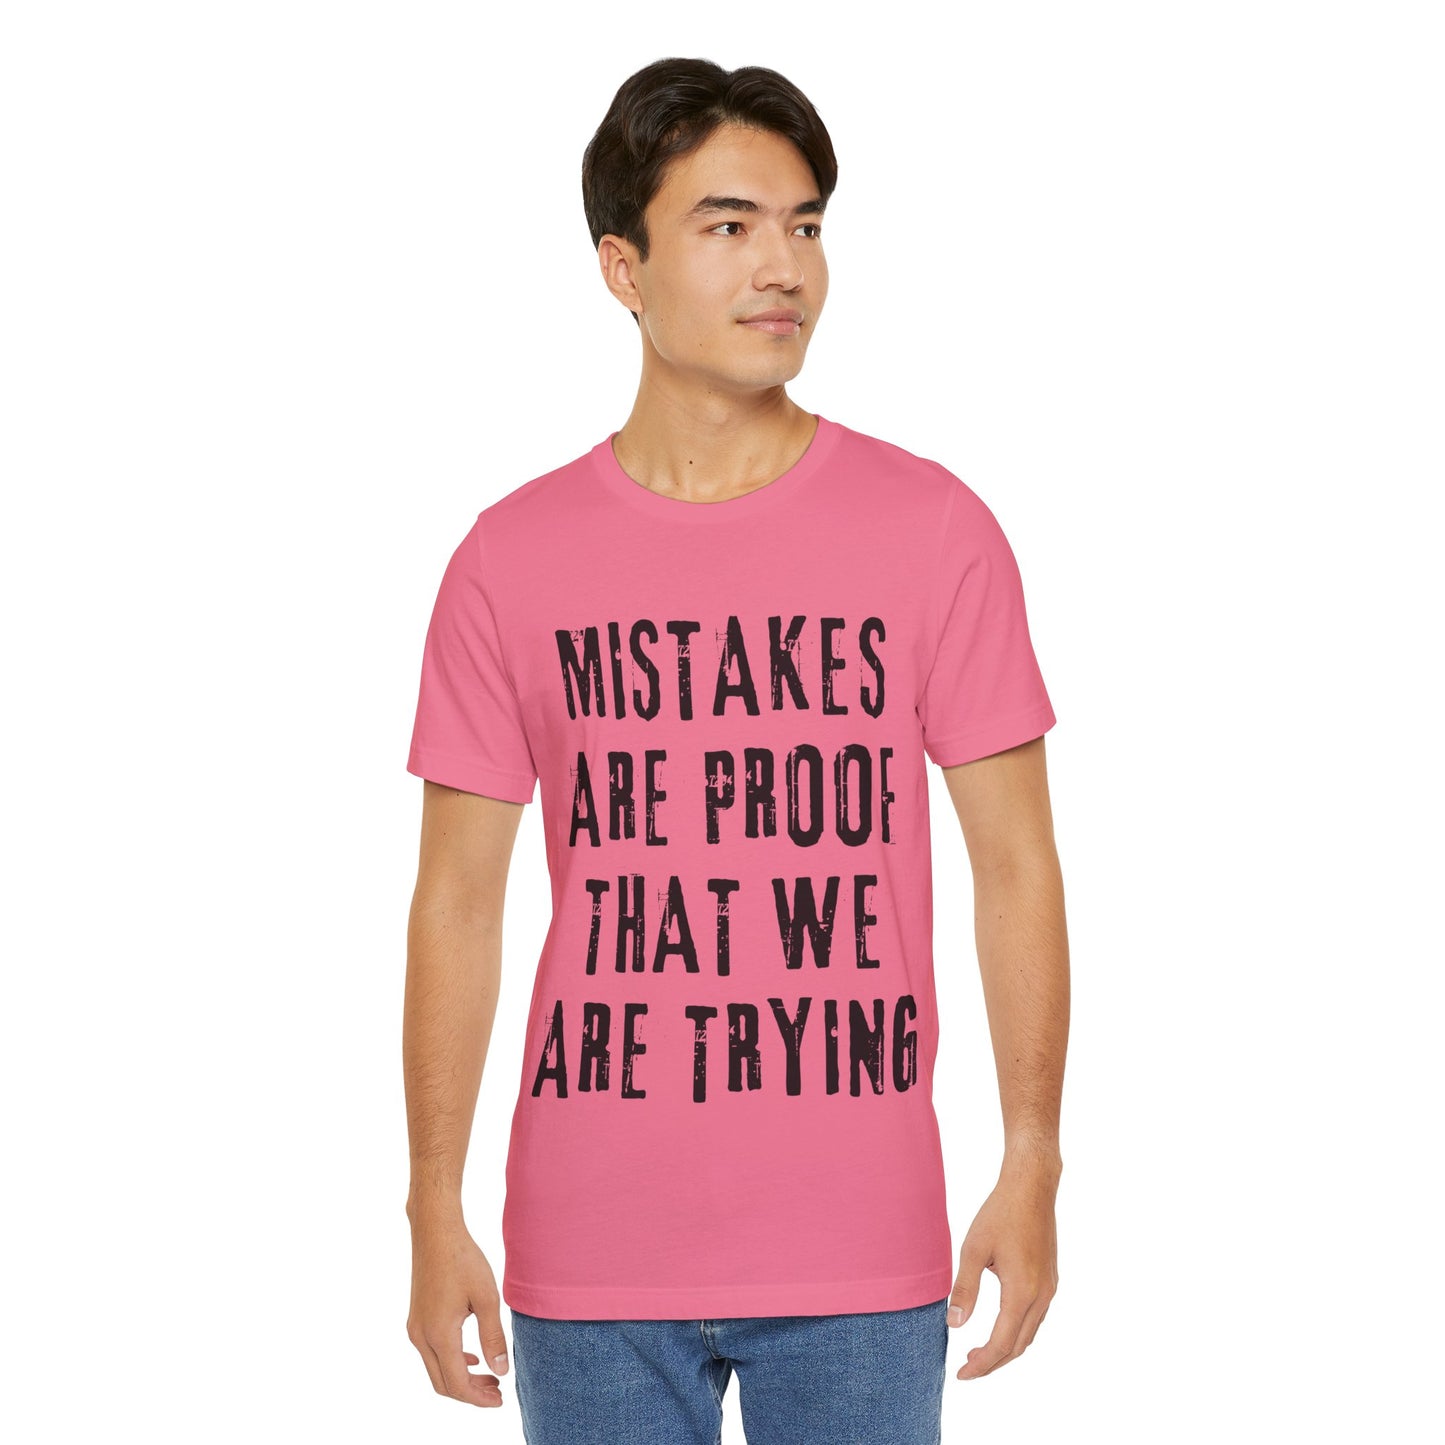 Mistakes are proof T-shirt - Light Colors